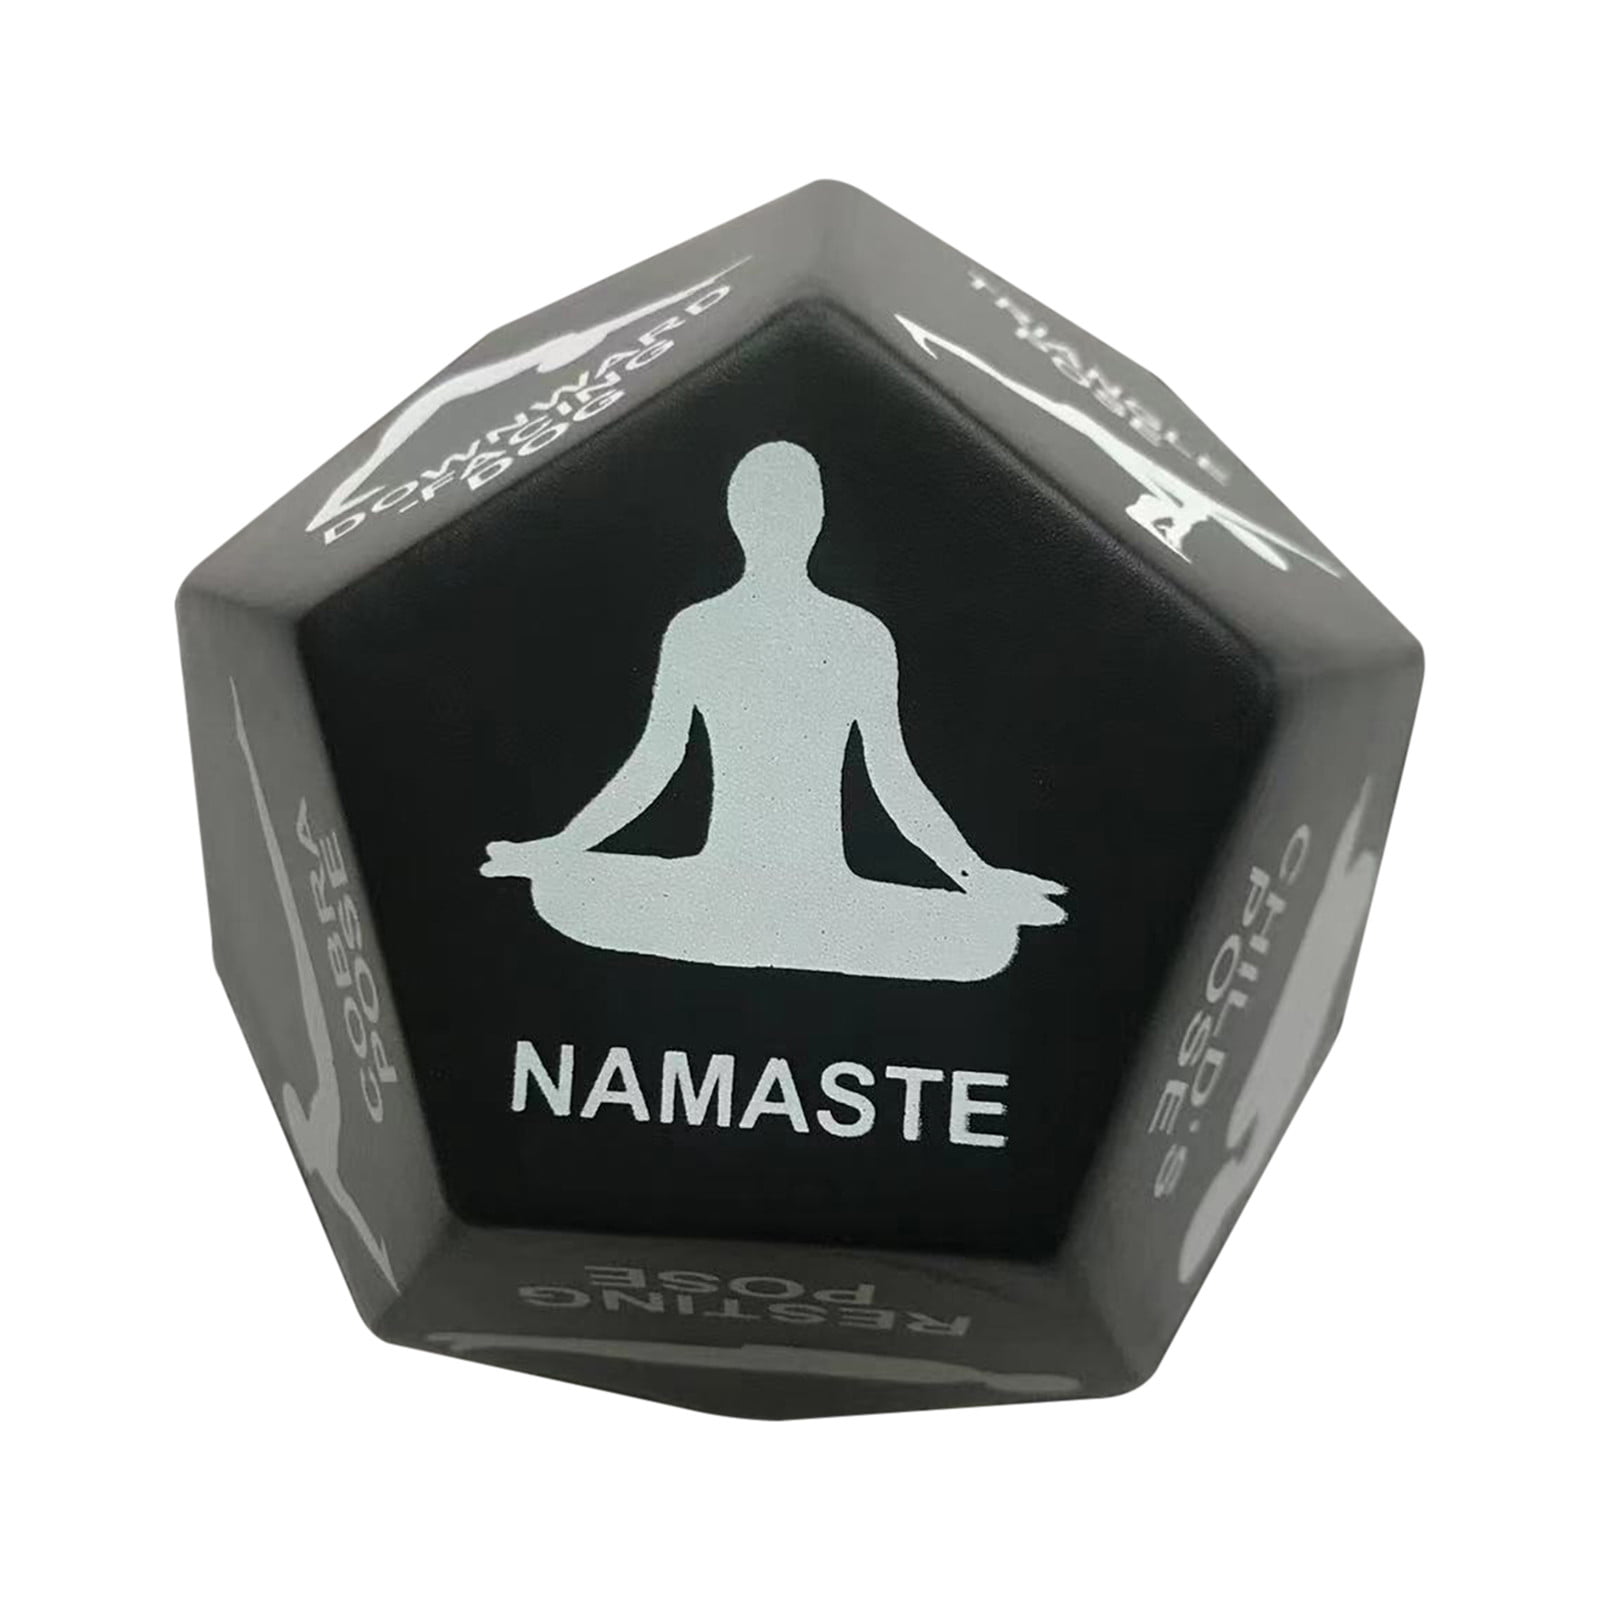 Indoor Yoga Sport Dice, Great Gift, 1PC or 4PCS/Set